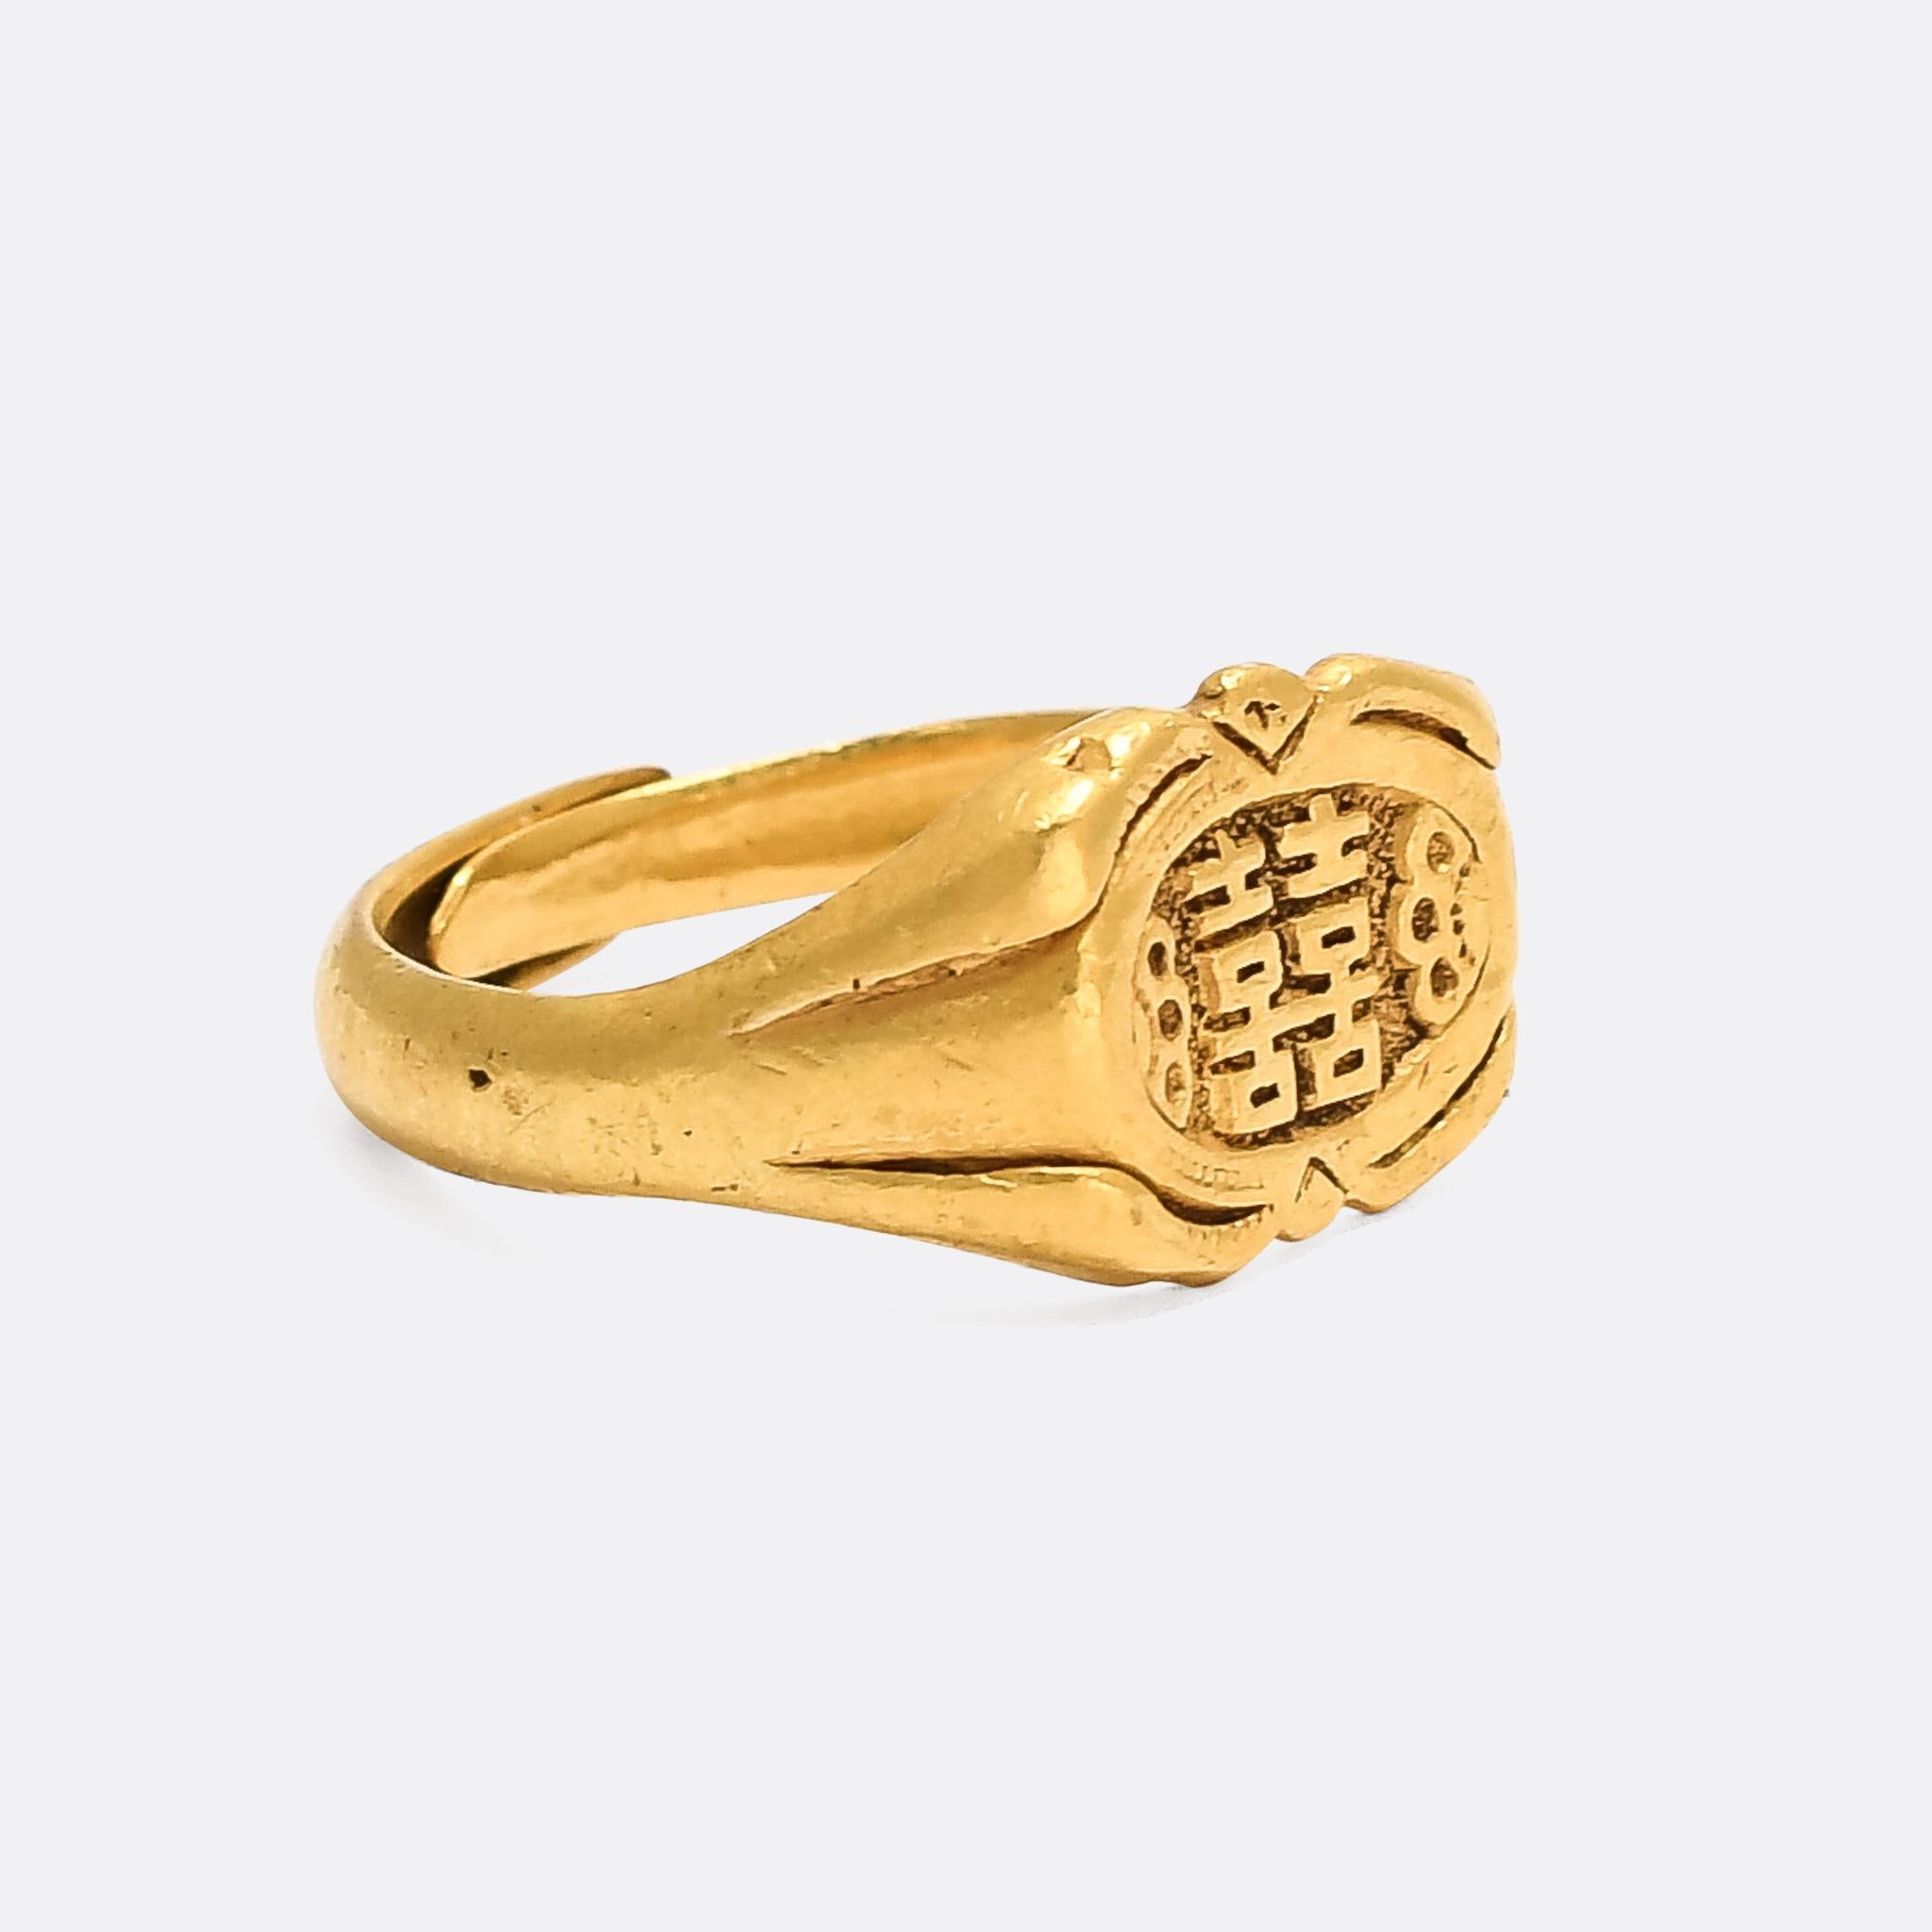 An incredible antique signet ring dating from the mid 19th Century. It's Chinese, with the symbol 